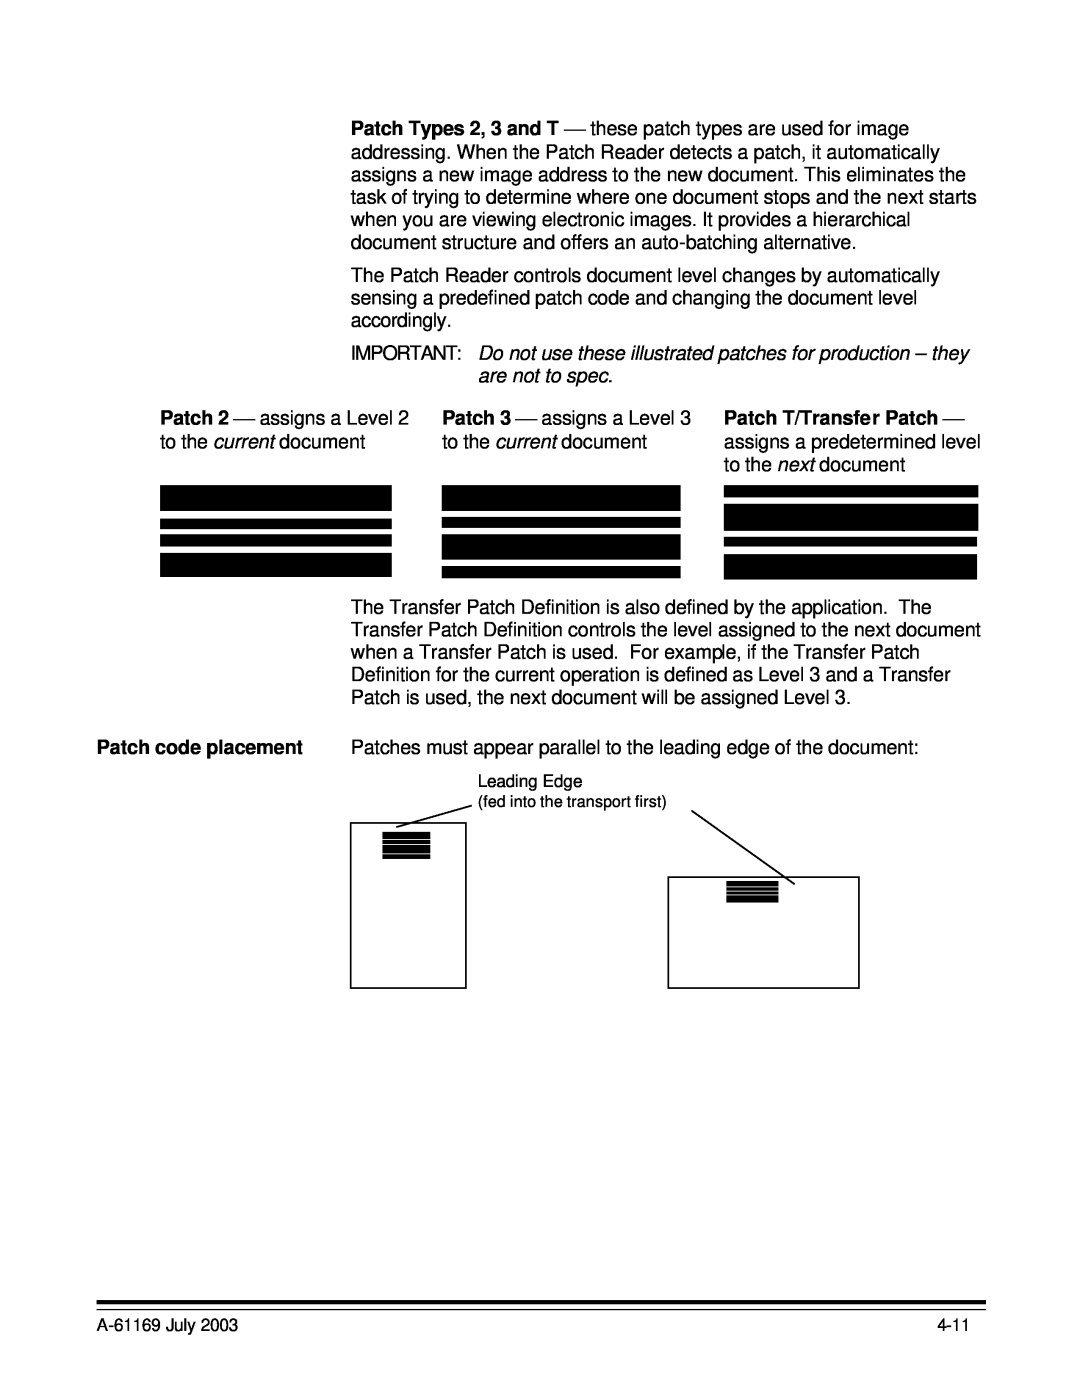 Kodak i800 Series manual Patch 2 ⎯ assigns a Level 2 to the current document 